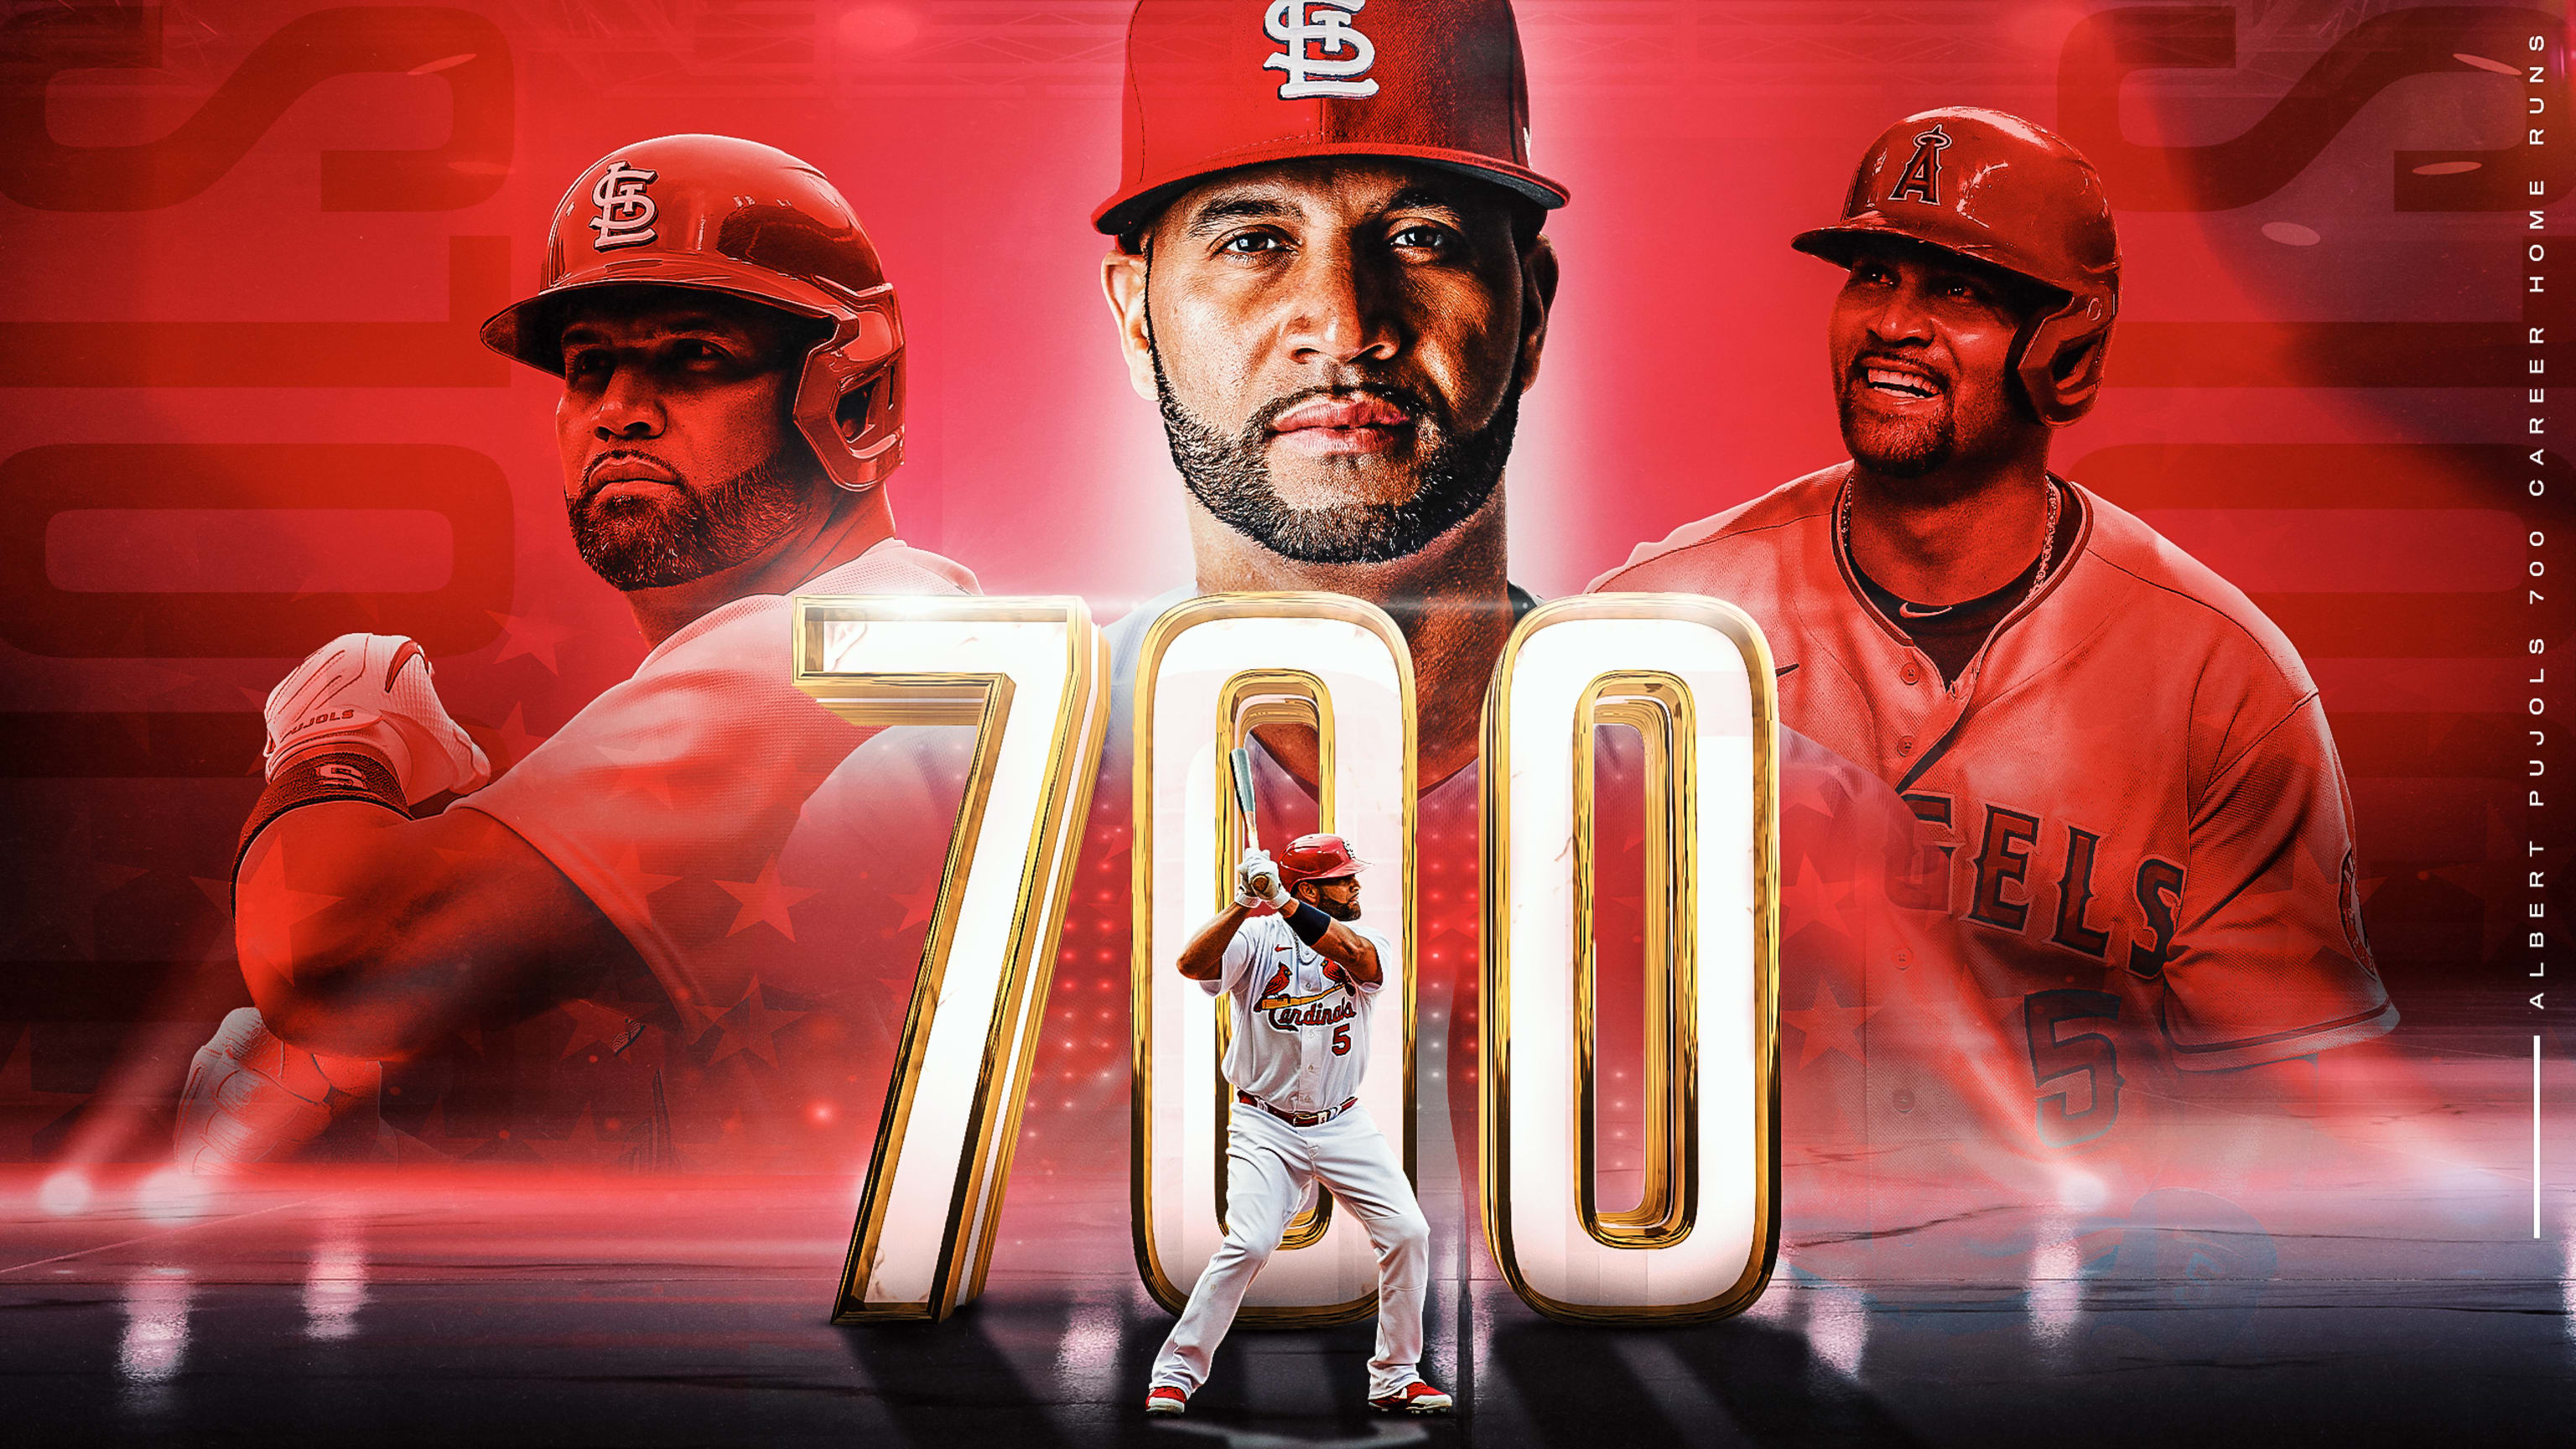 A look at Pujols over the years